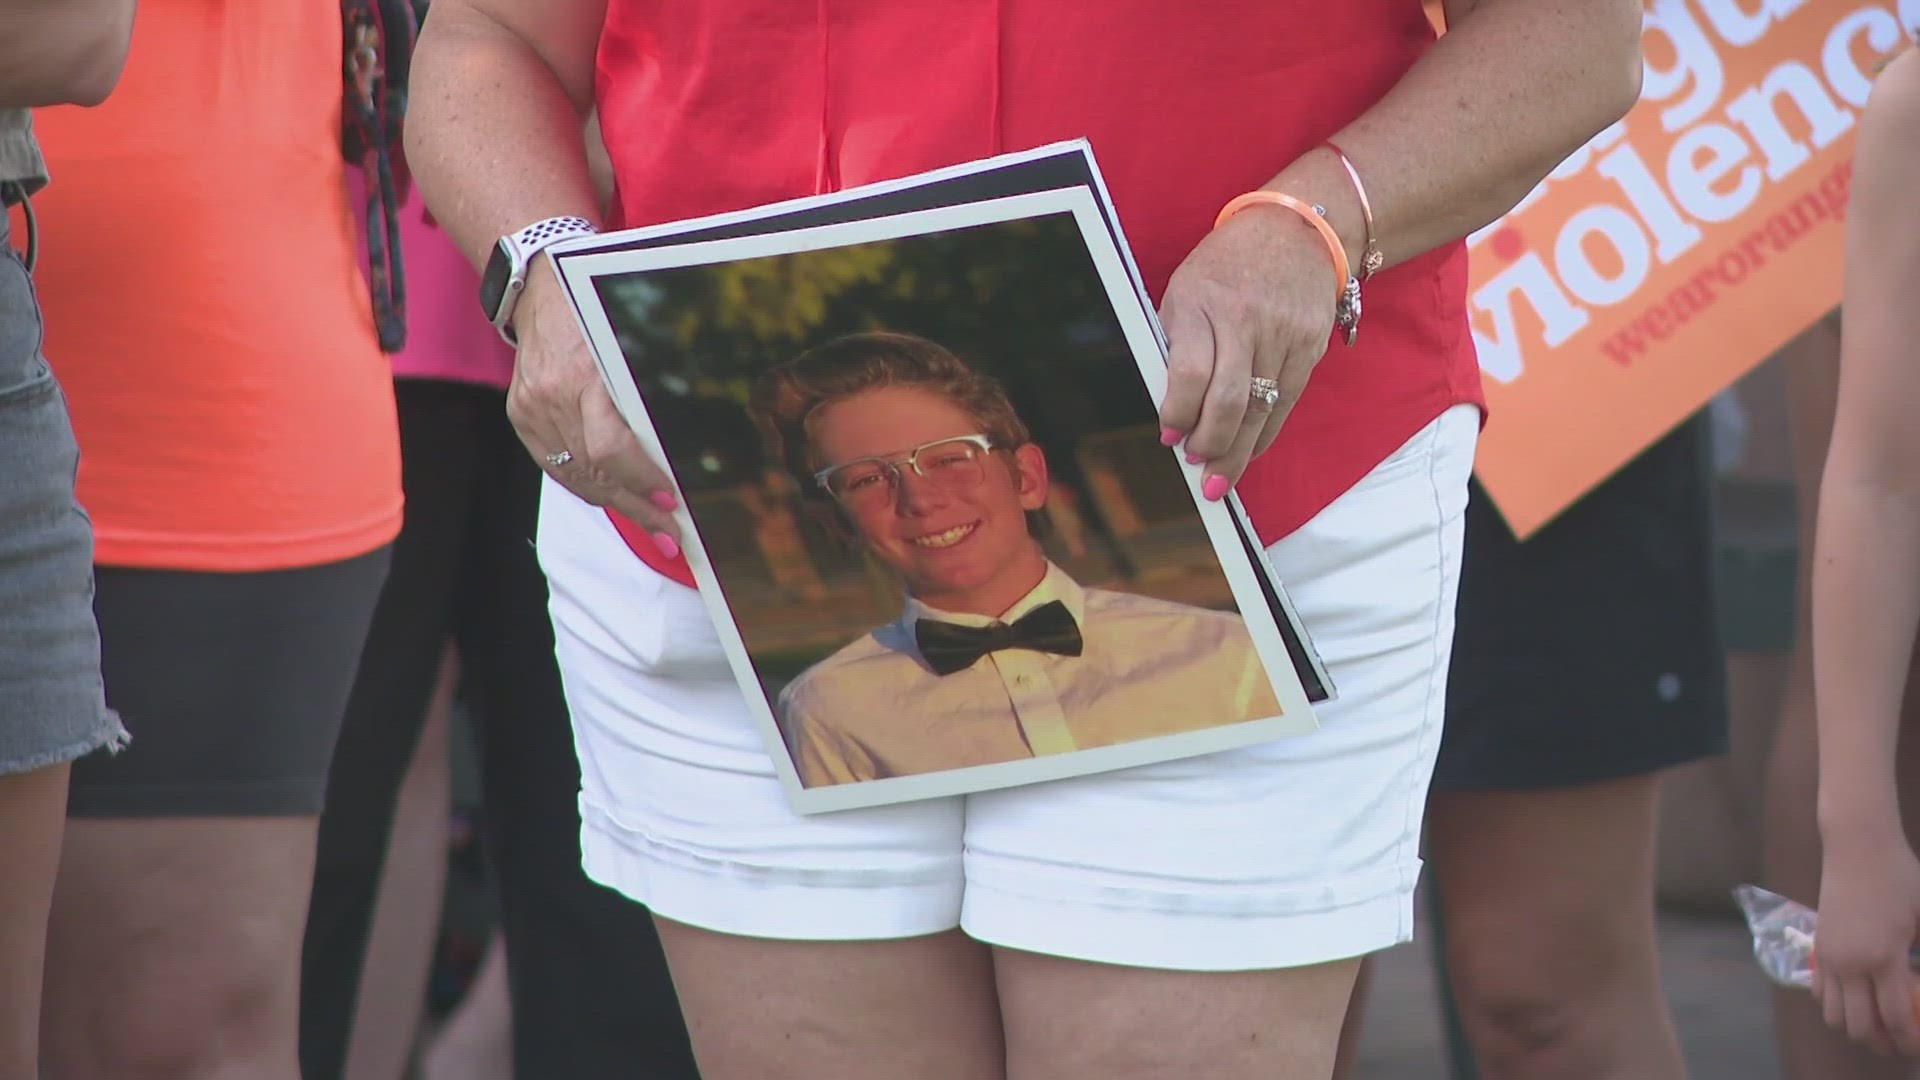 Saturday was an emotional night in Gilbert as the community remembered the lives cut short by gun violence.